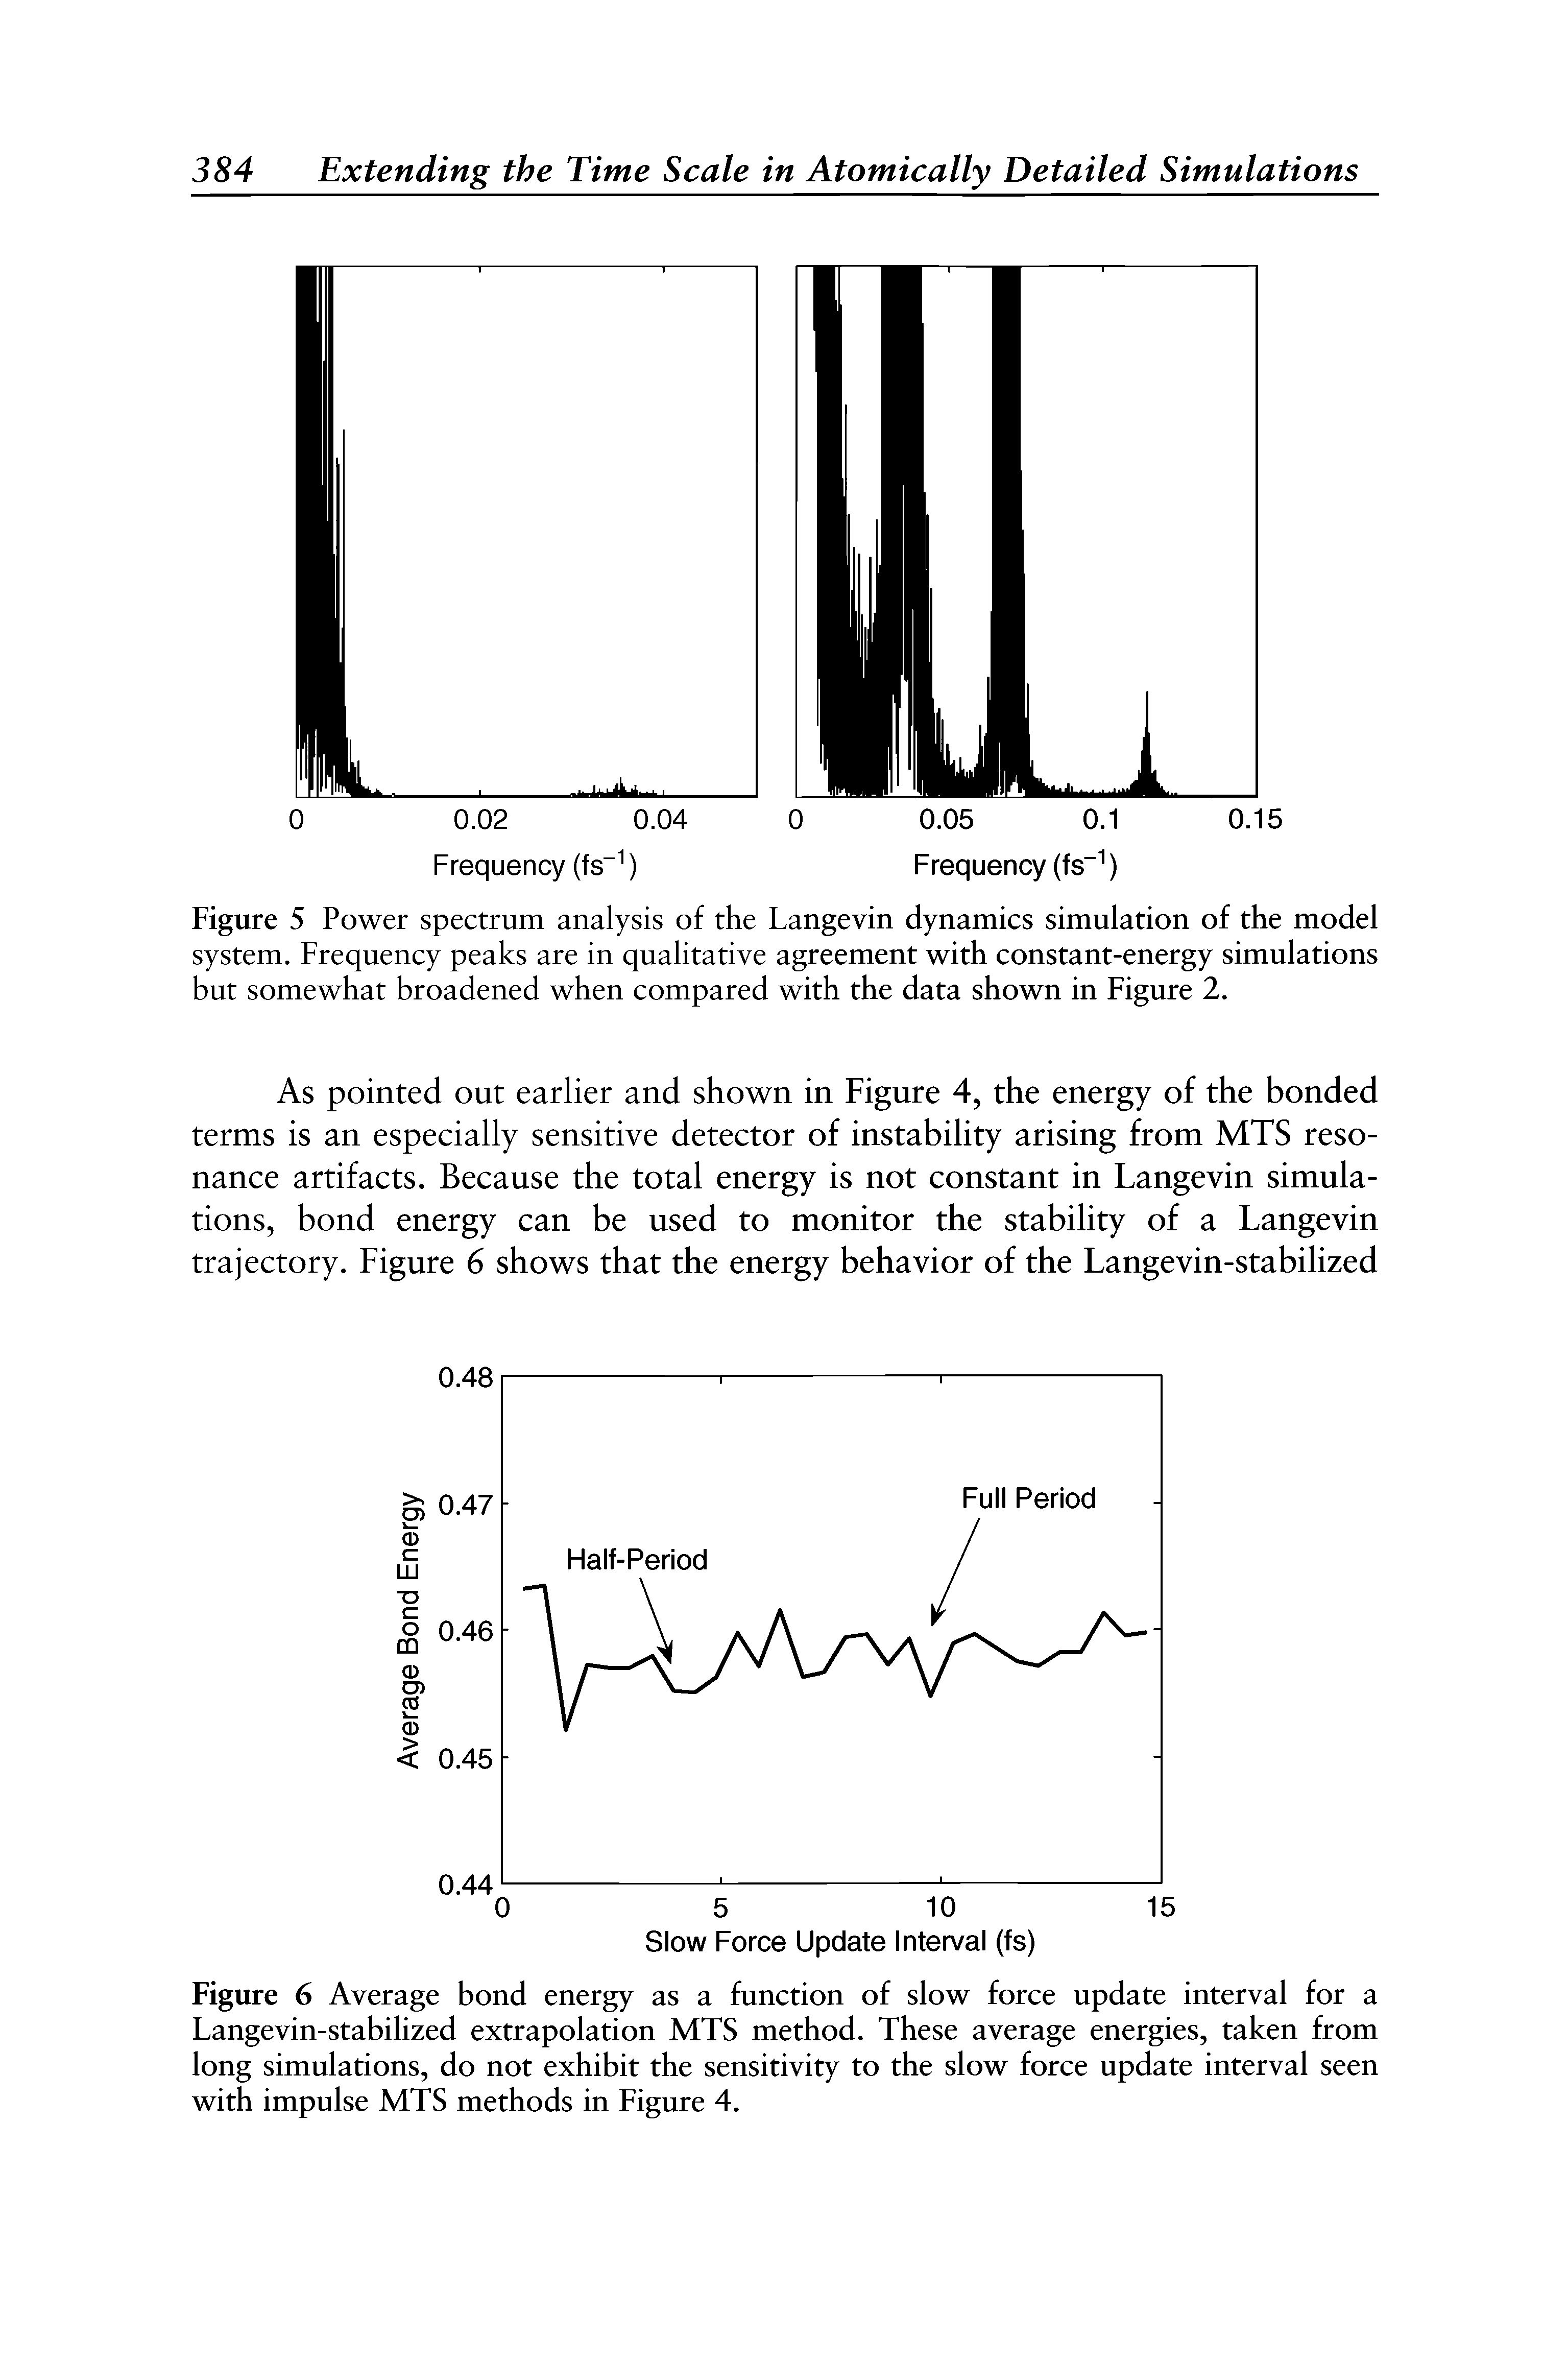 Figure 5 Power spectrum analysis of the Langevin dynamics simulation of the model system. Frequency peaks are in qualitative agreement with constant-energy simulations but somewhat broadened when compared with the data shown in Figure 2.